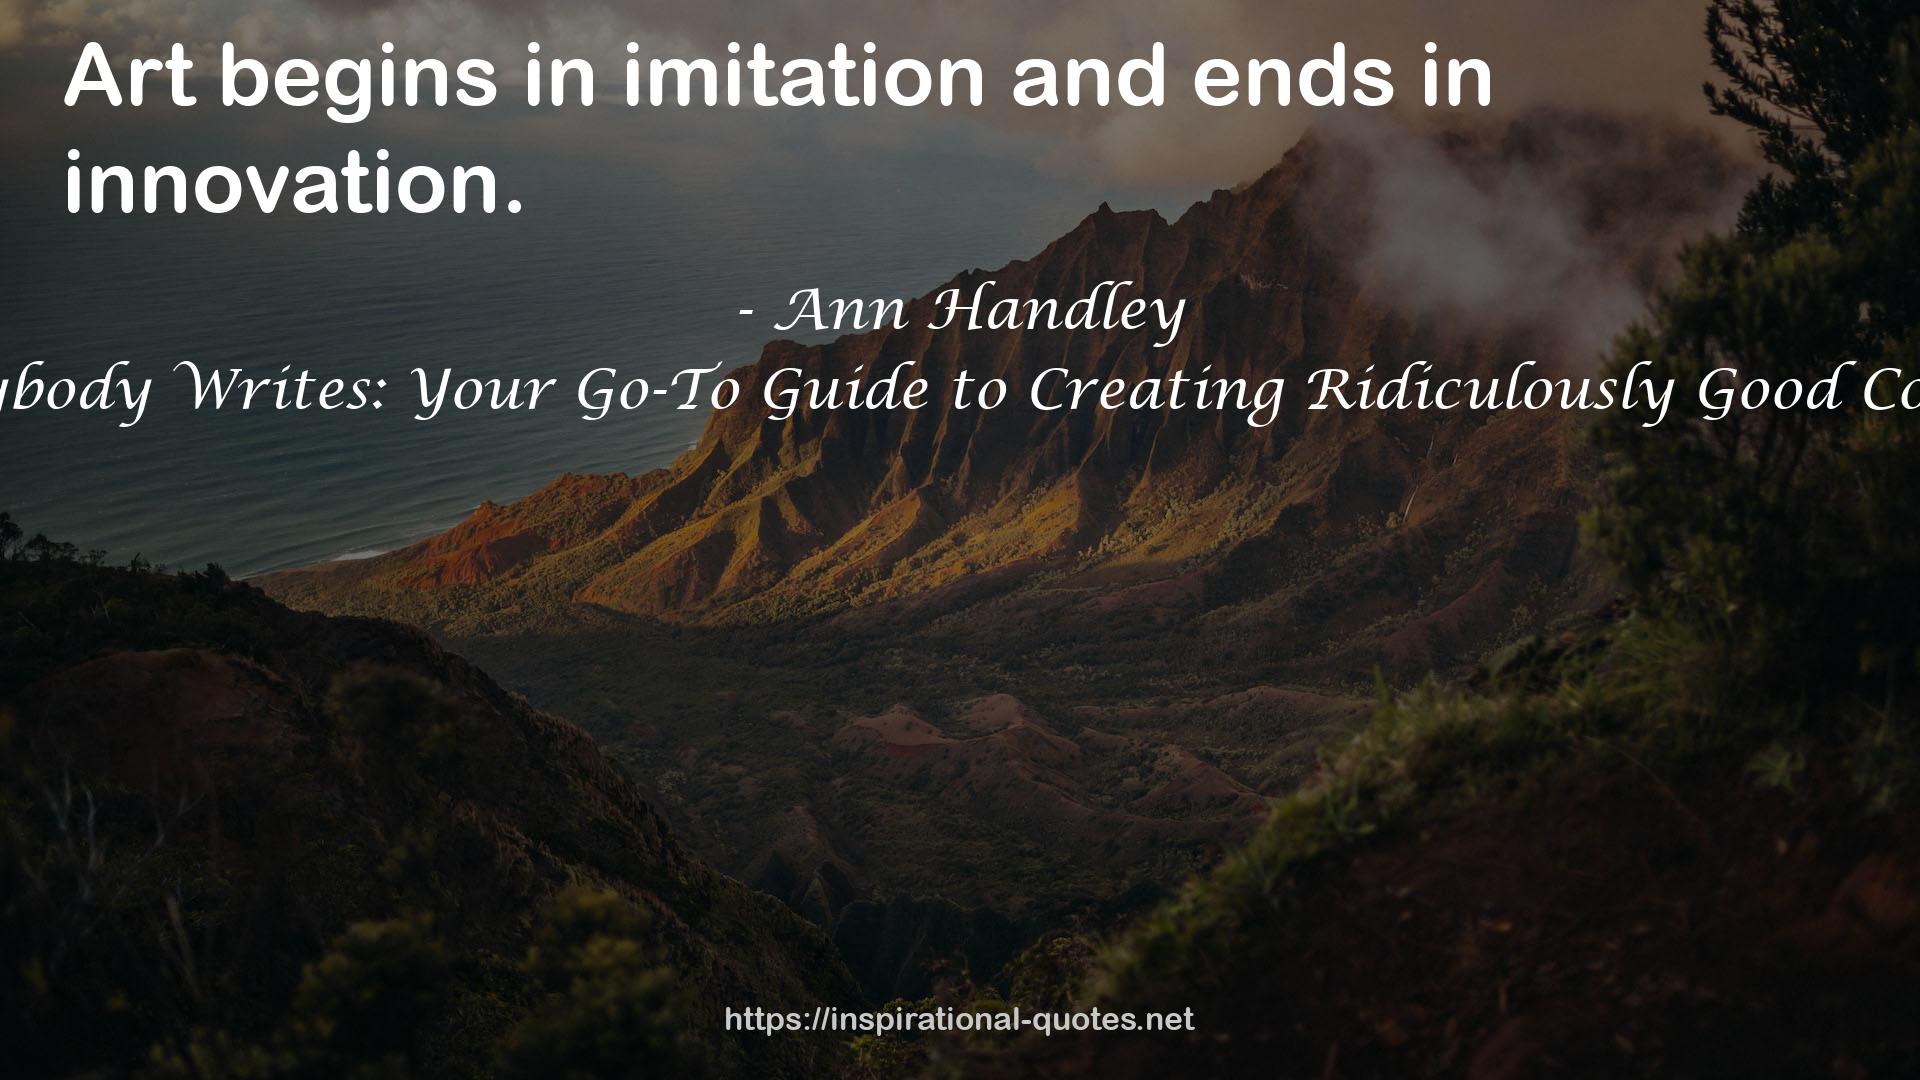 Ann Handley QUOTES